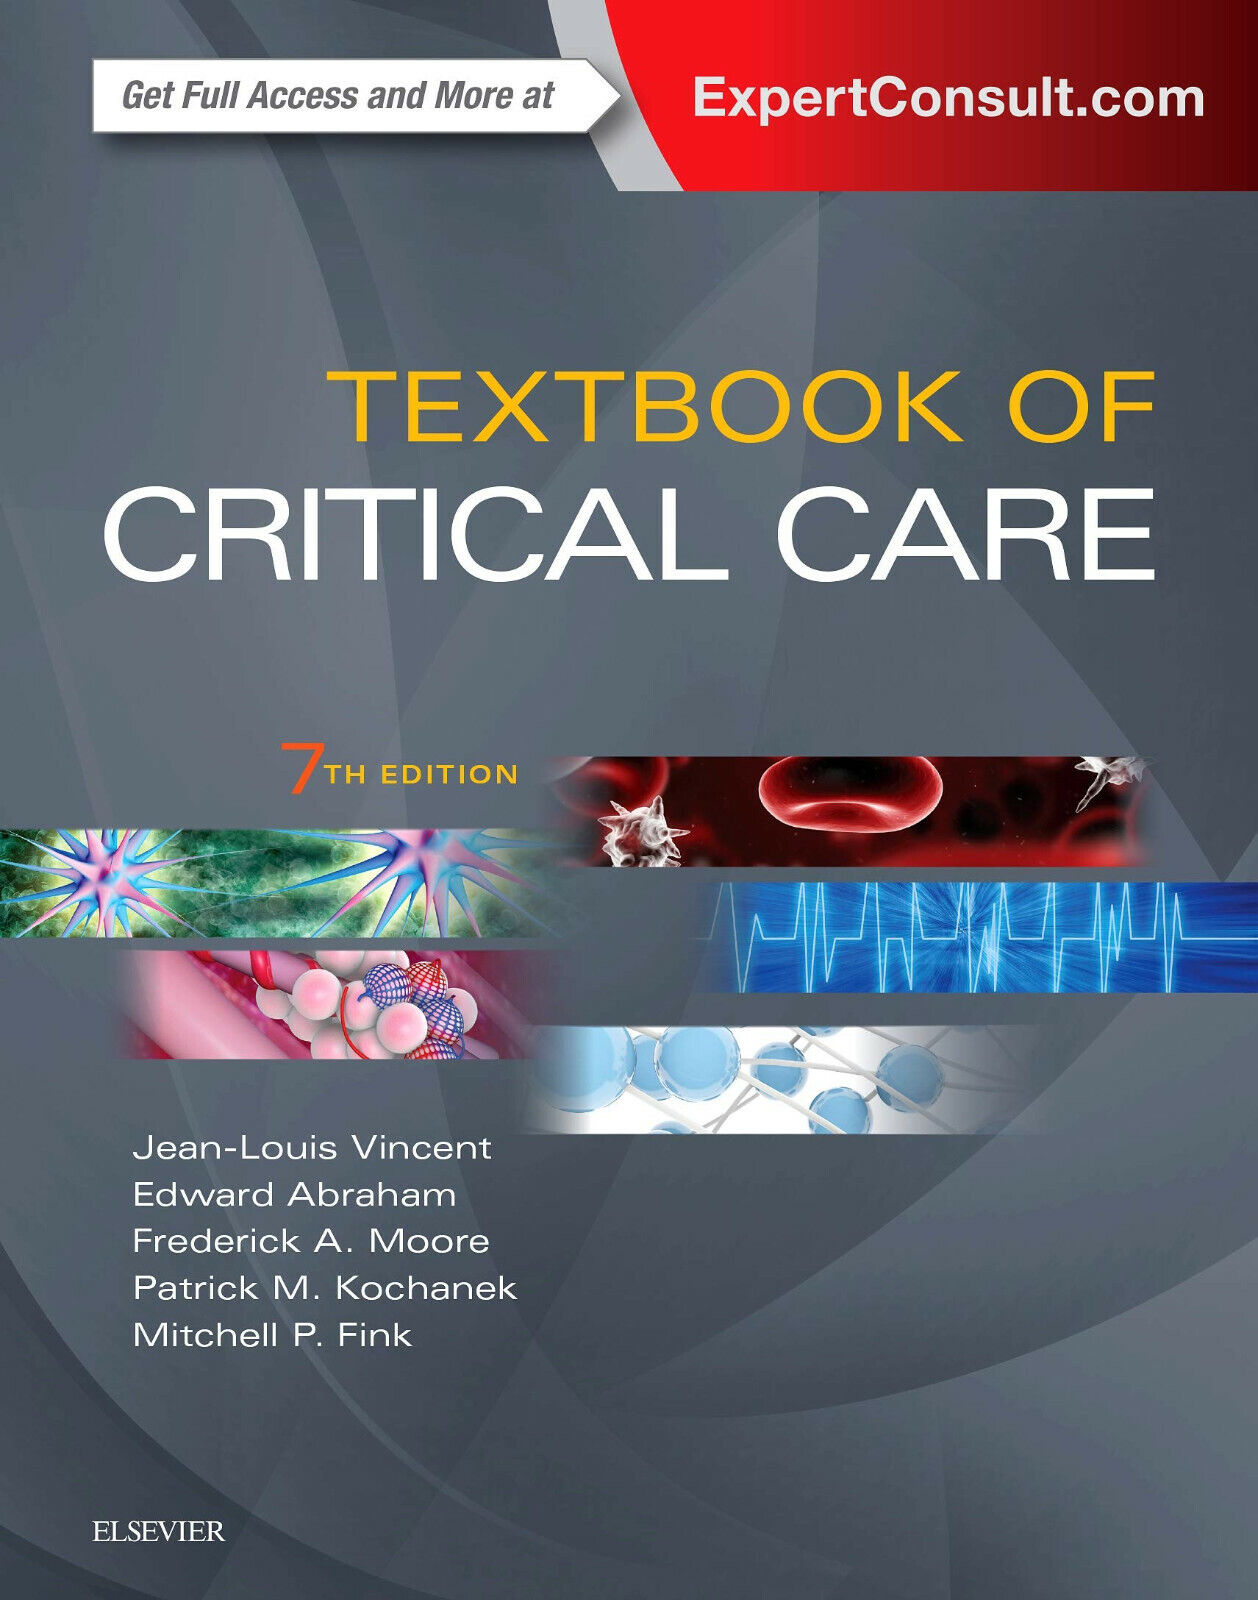 Textbook of Critical Care, 7th Edition - Elsevier, 2017